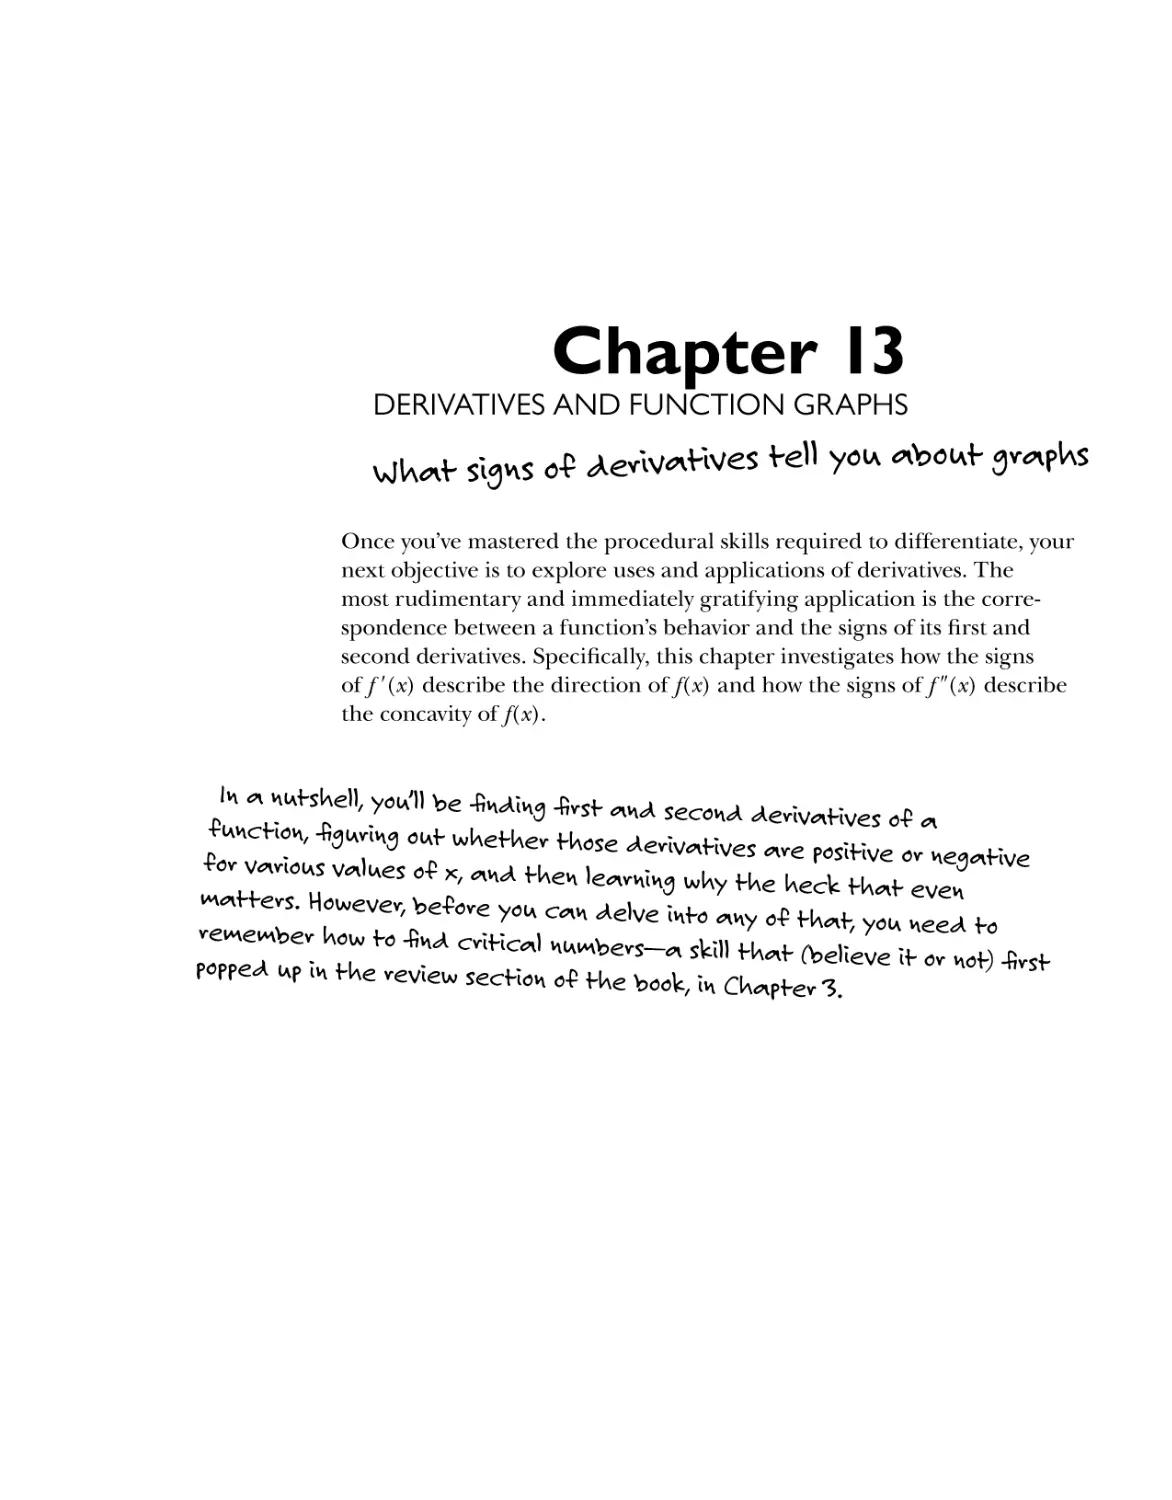 Chapter 13: Derivatives and Function Graphs 187